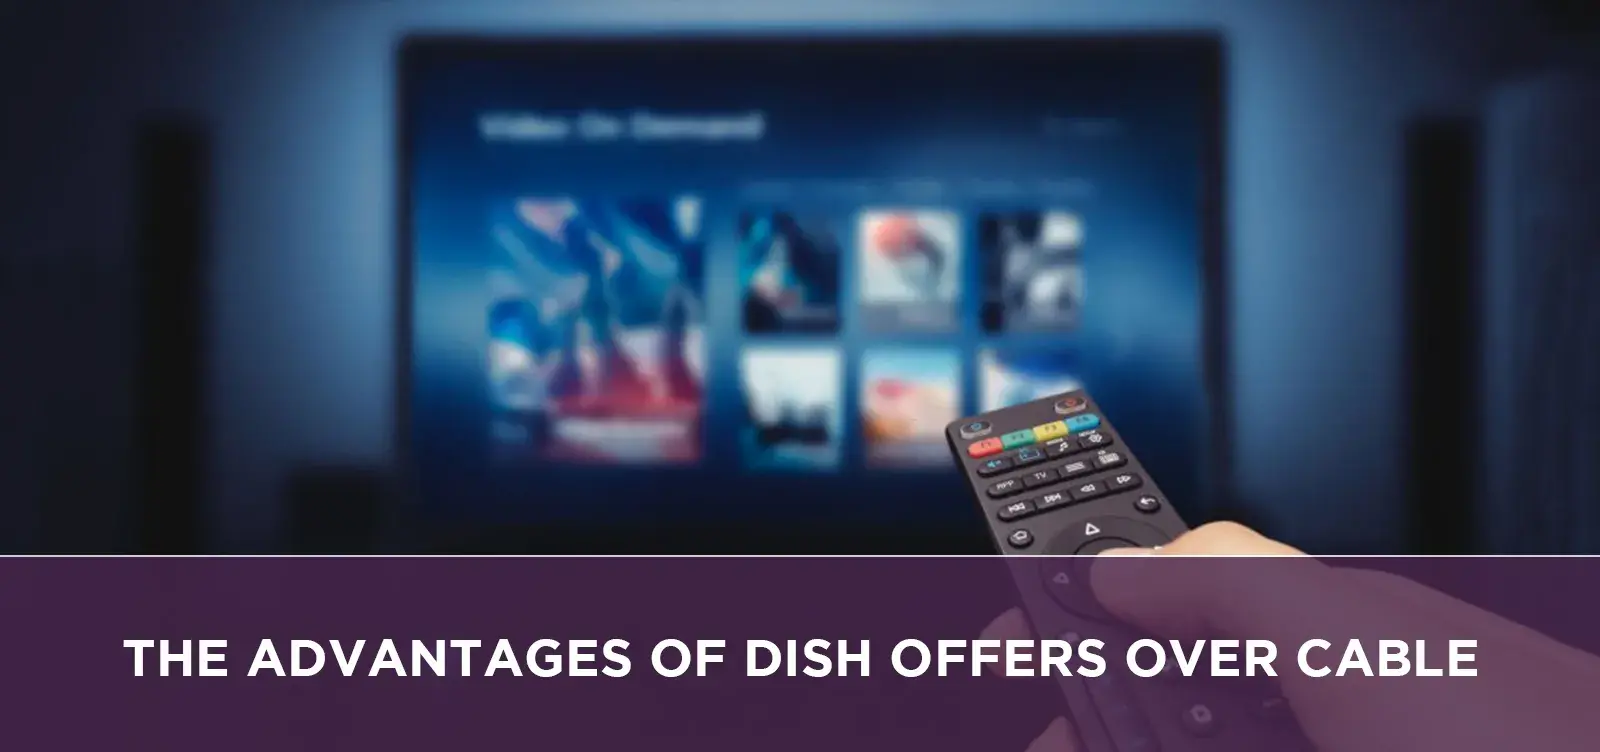 The Advantages of Dish Over Cable